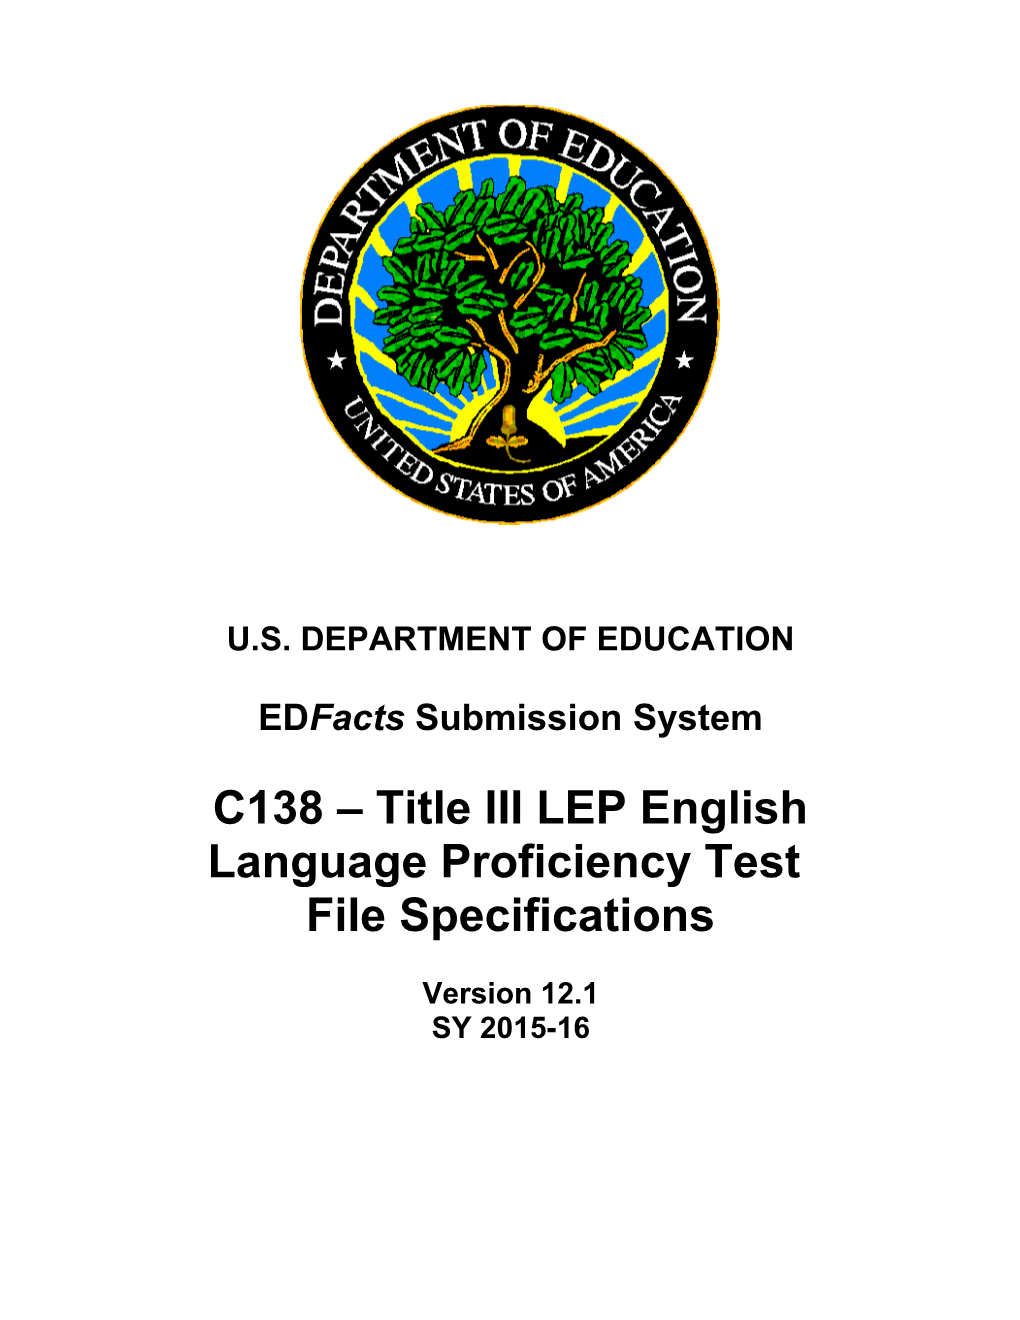 Title III LEP English Language Proficiency Test File Specifications (Msword)